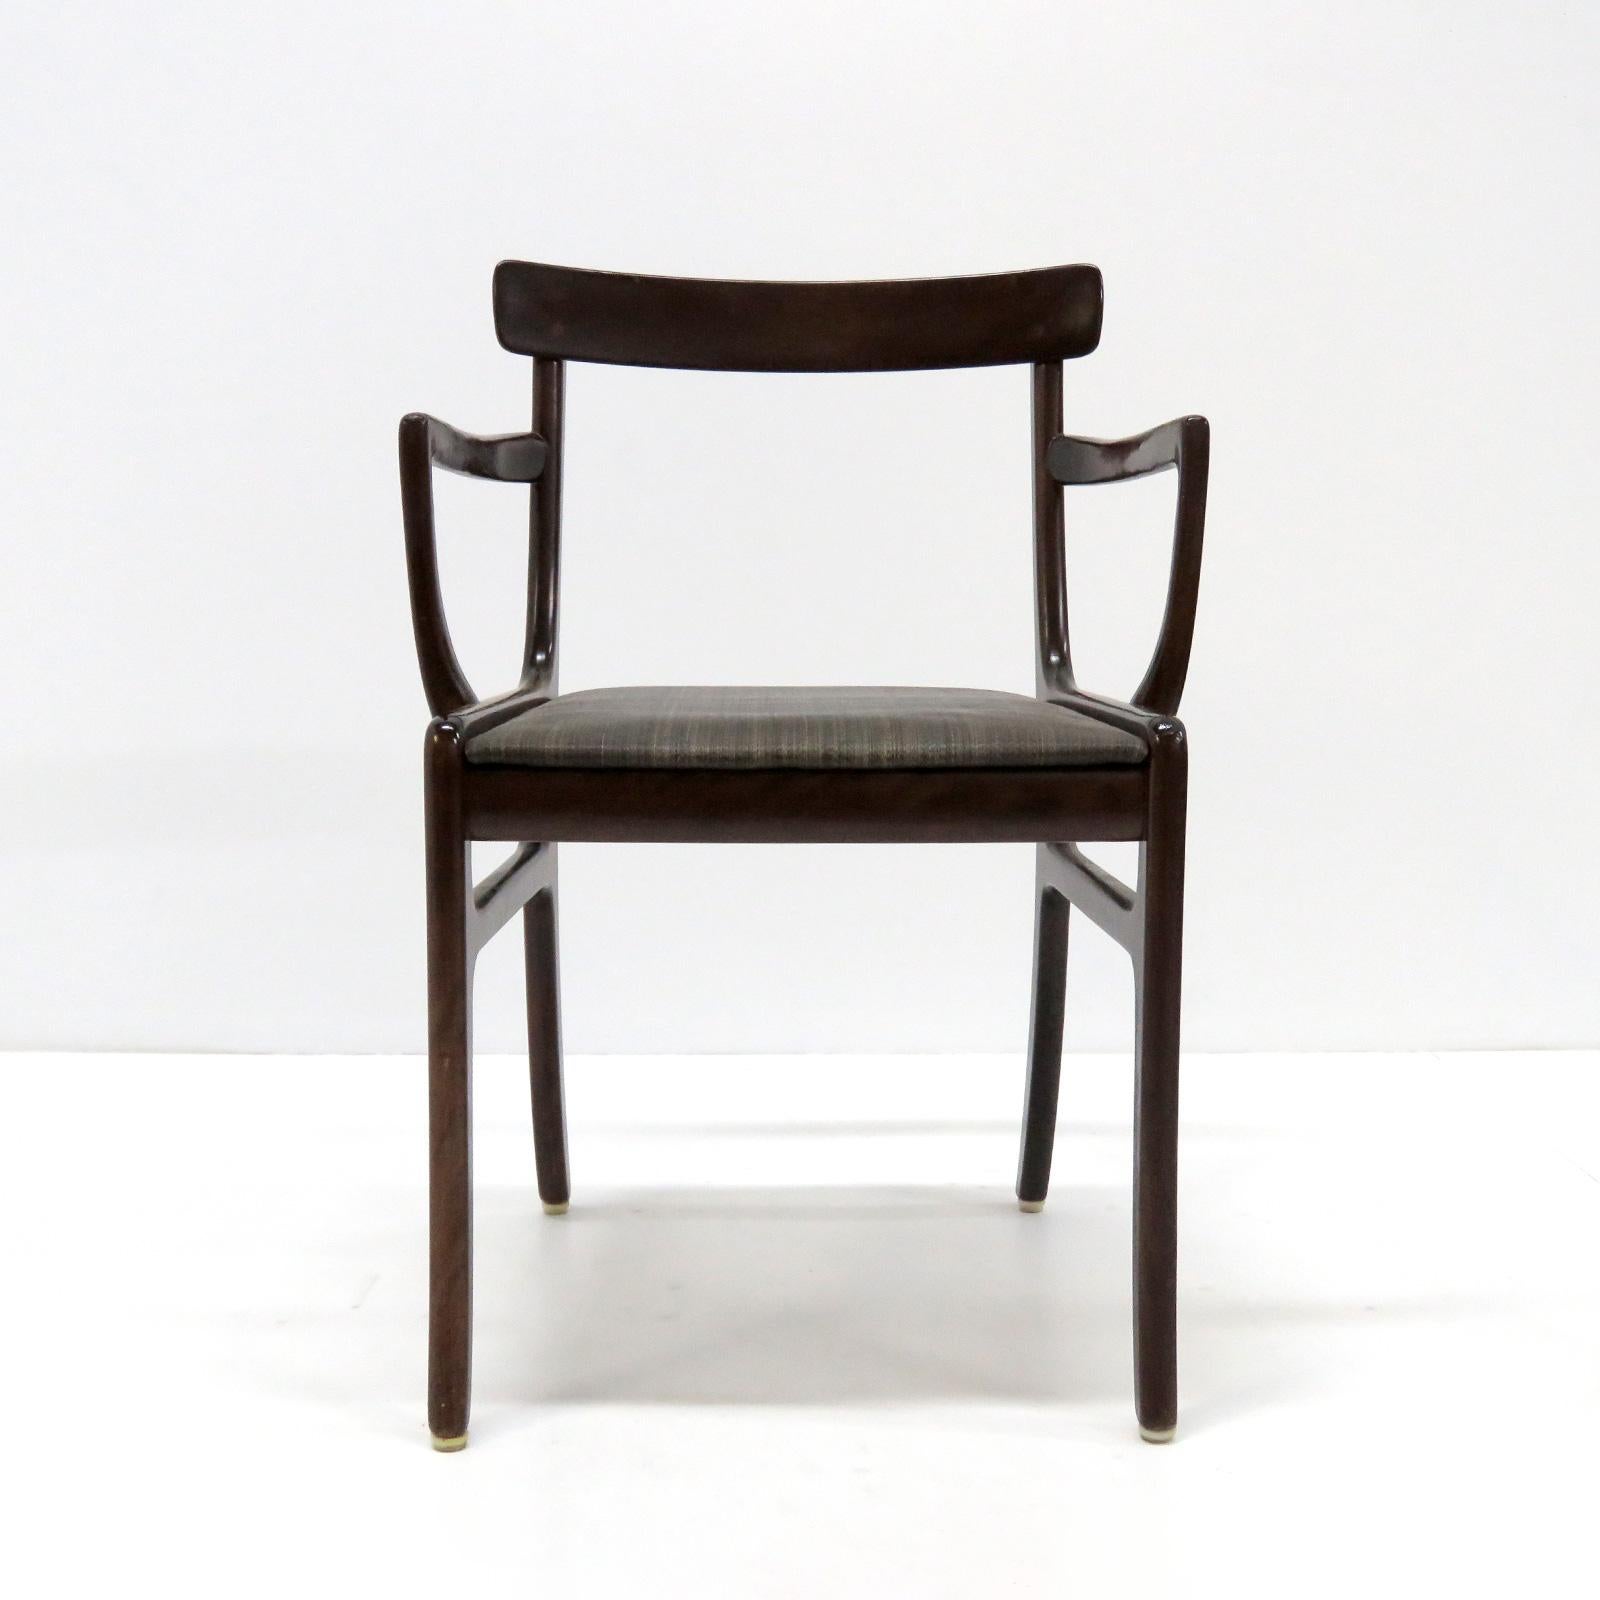 Stunning 1950s pair of organically shaped mahogany dining arm chairs model 'Rungstedlund' by Ole Wanscher for P. Jeppesen, Denmark. The seats are covered in the original very dark brown striped horsehair upholstery, marked with the metal PJ tag. The